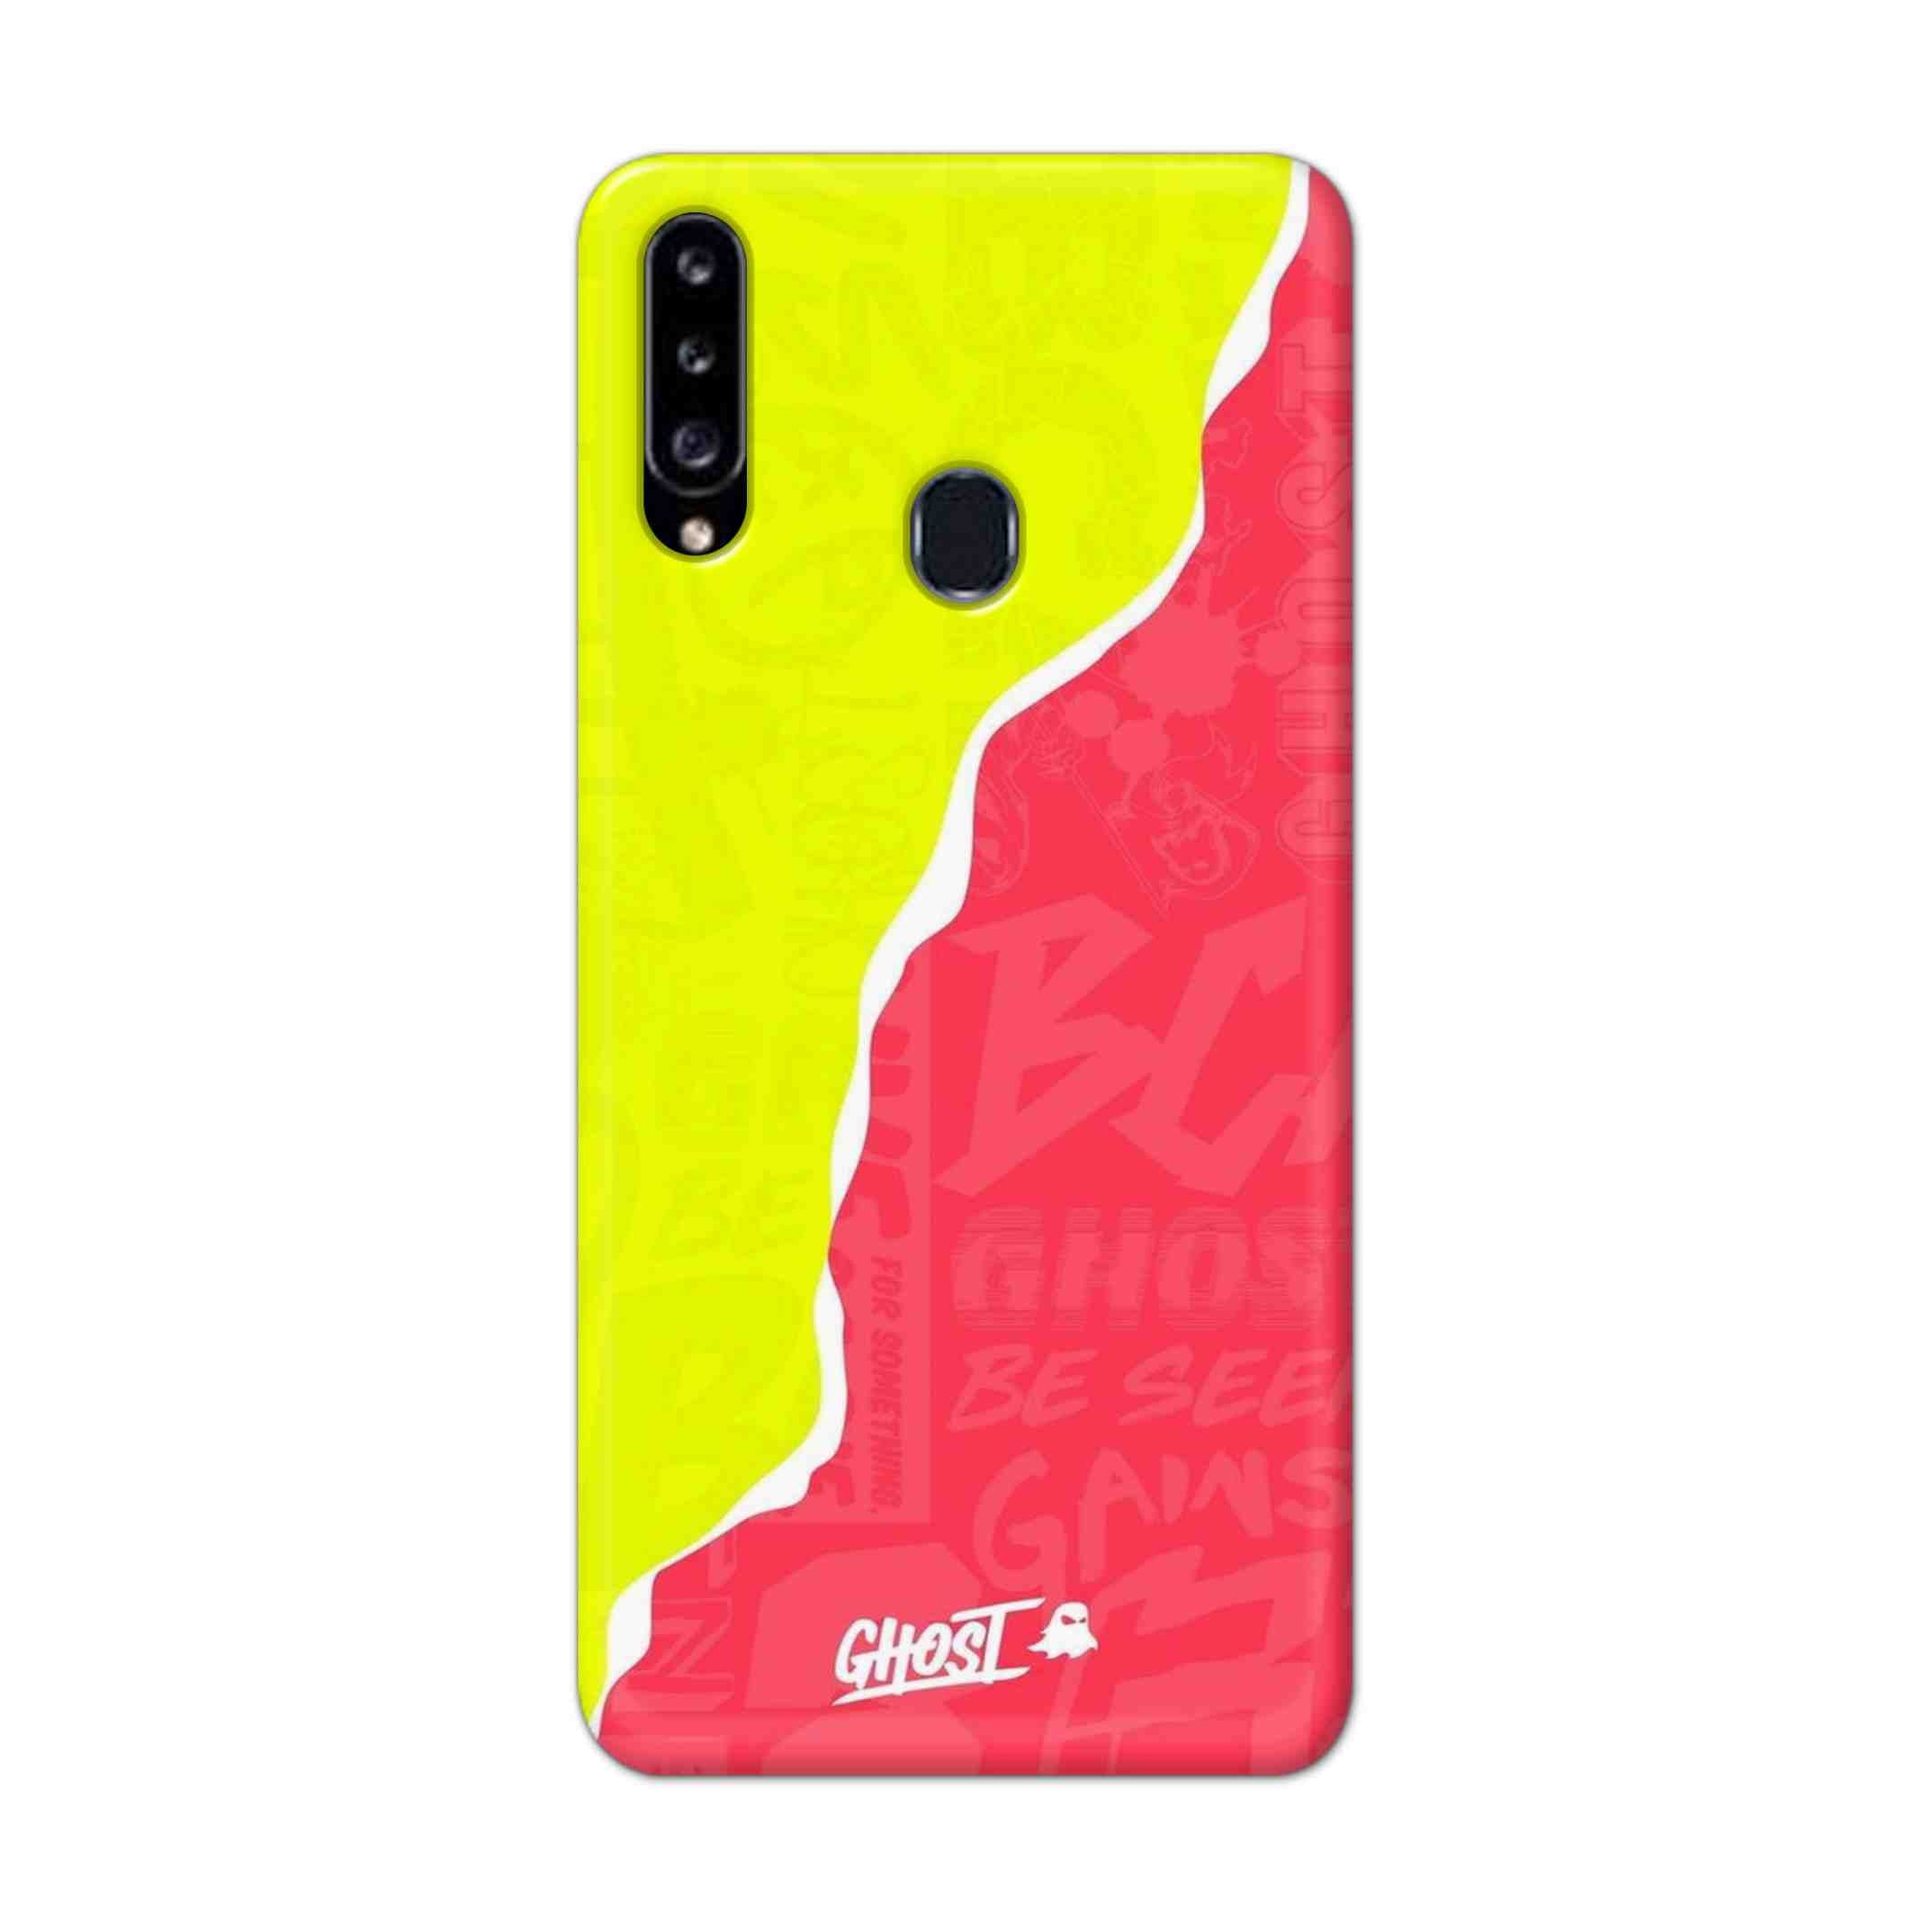 Buy Ghost Hard Back Mobile Phone Case Cover For Samsung Galaxy A21 Online